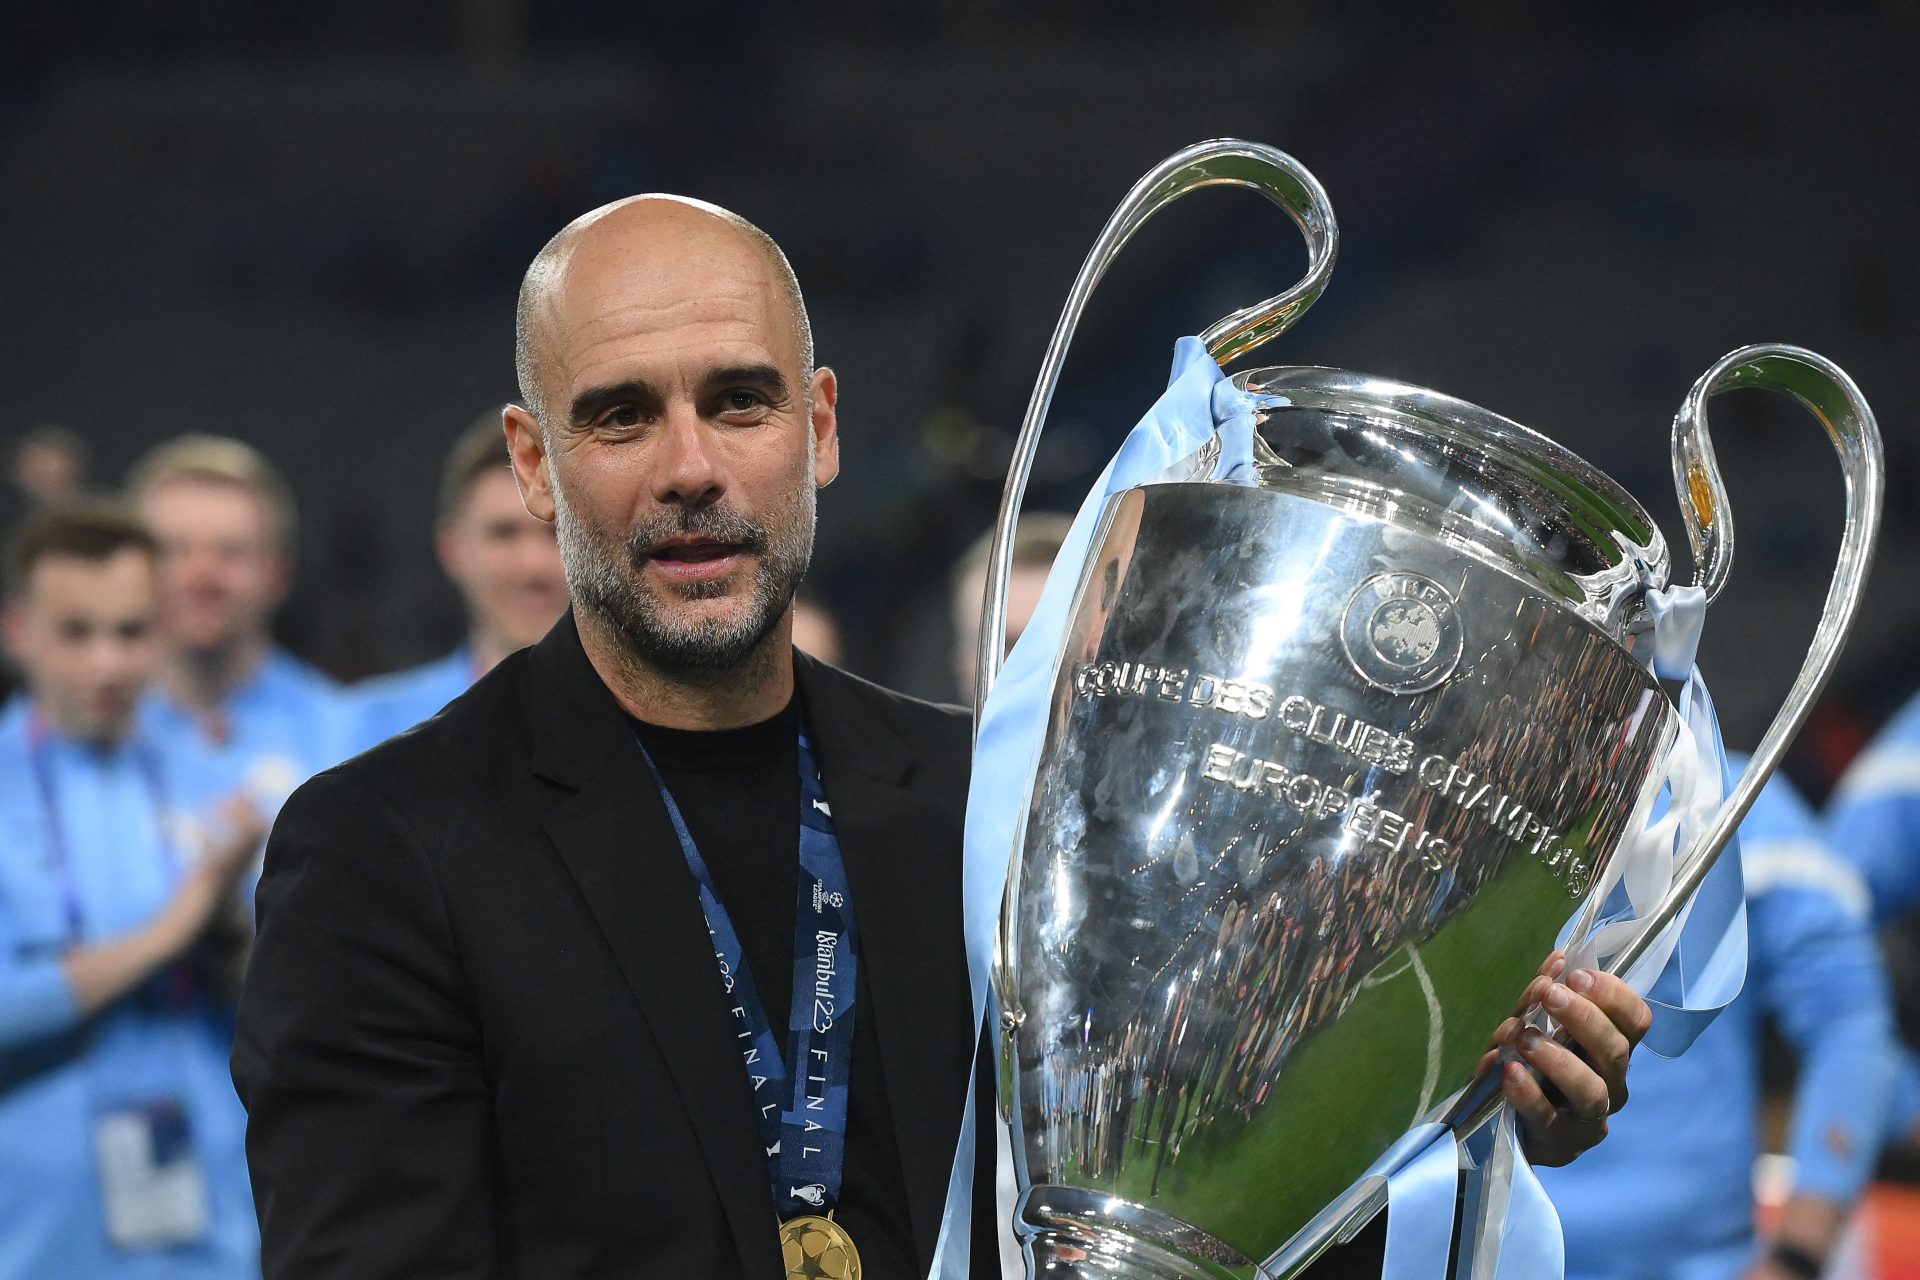 Who are the potential candidates to replace Pep Guardiola at Manchester City?